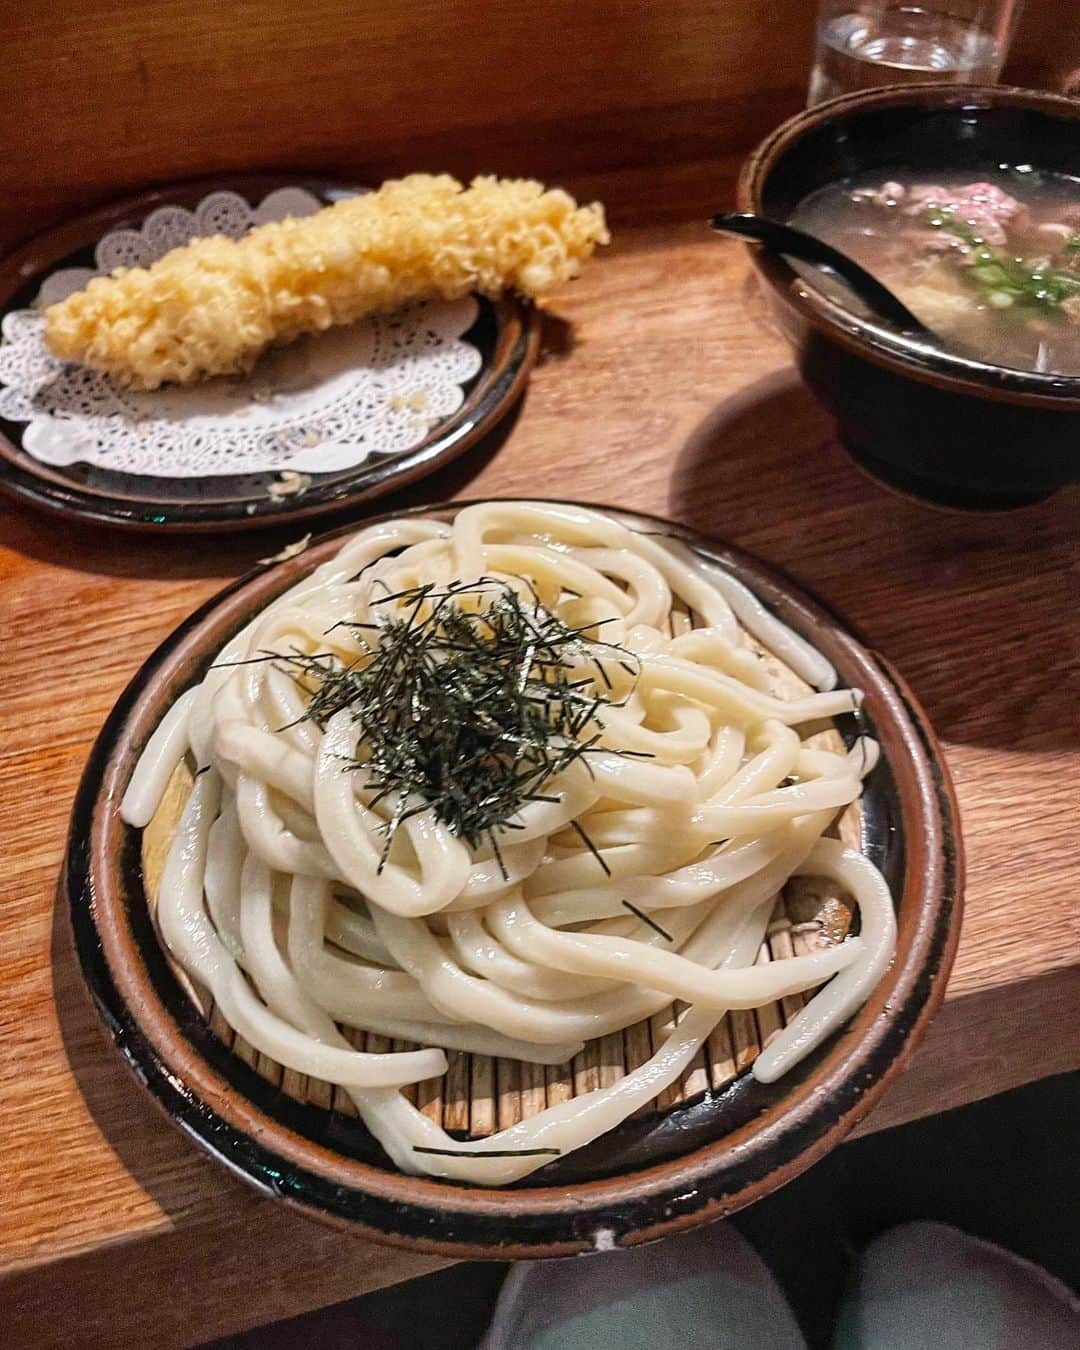 Eat With Steph & Coのインスタグラム：「Craved for some Japanese food and found this authentic Japanese restaurant in Soho 🤩 Loved the Fresh Udon, do you know that it's made every morning from scratch? How amazing!!! 🥰 @koyalondon   📍 Location: Soho 💸 Cost: ££ 🍃 Veg options: Yes! 🍜 Best dishes: Fresh Udon 🍜 🥘 Cuisine: Japanese 🇯🇵 👀 Type: Casual meet up 👯‍♀️」